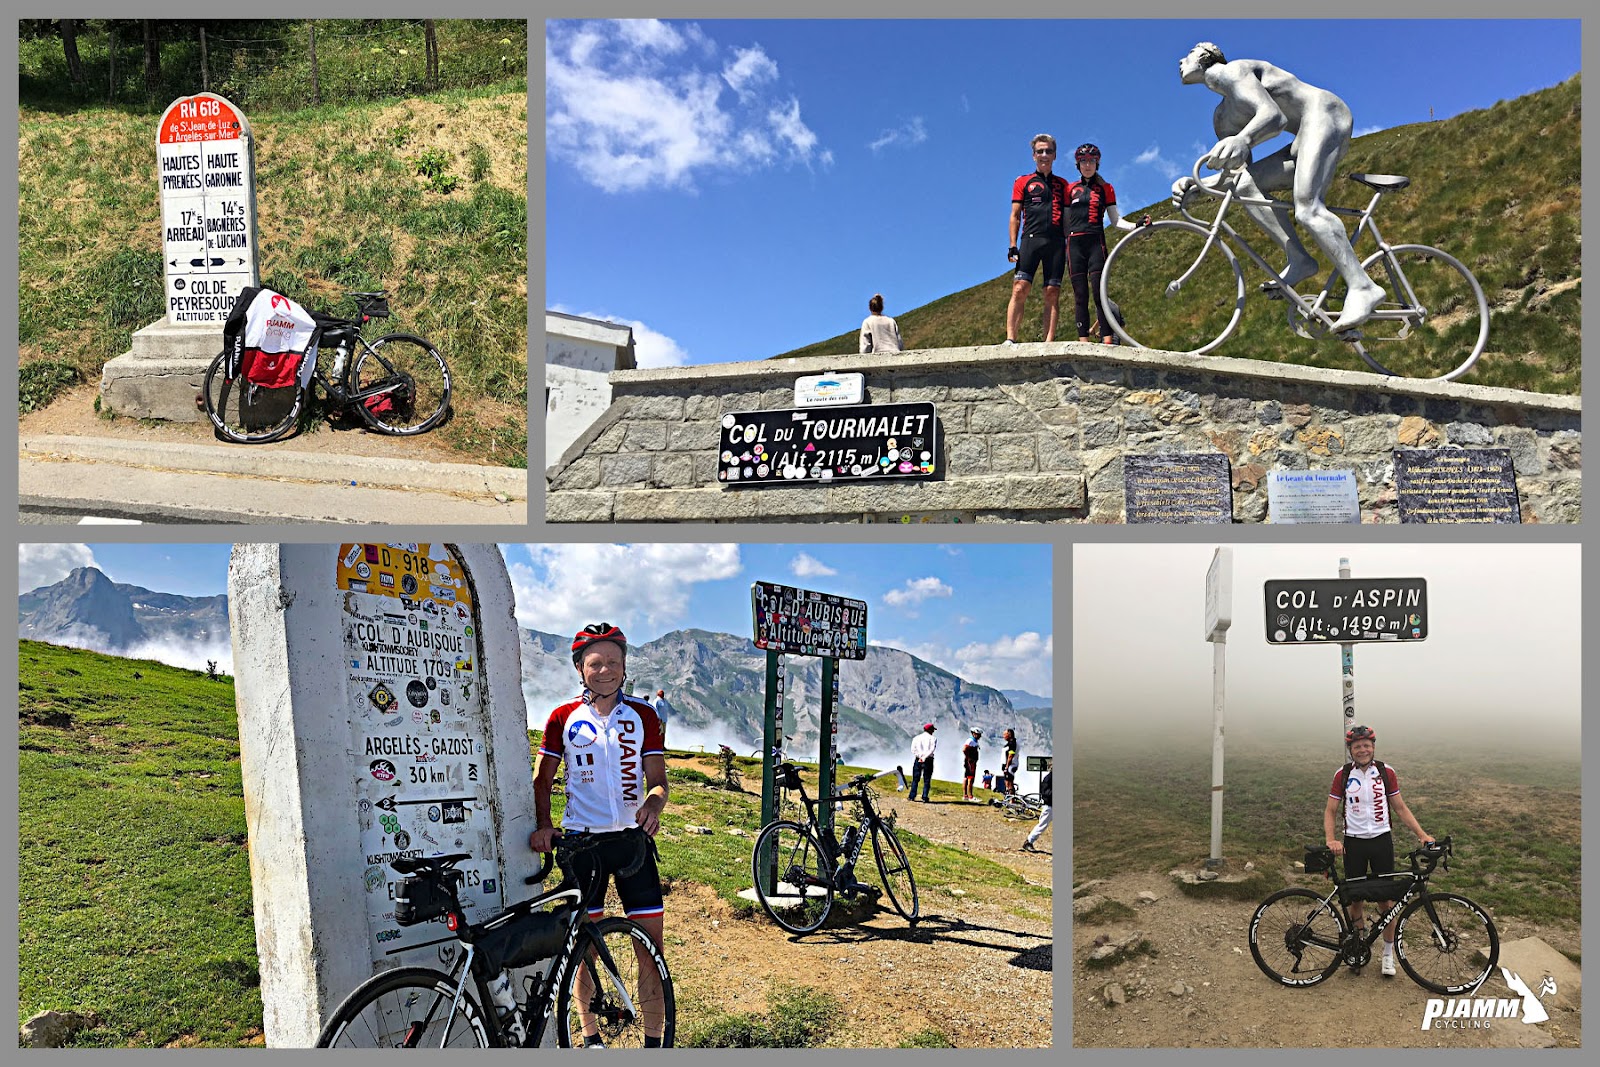 PJAMM Cyclists ride the "Circle of Death" - Col d'Aspin, Col du Tourmalet